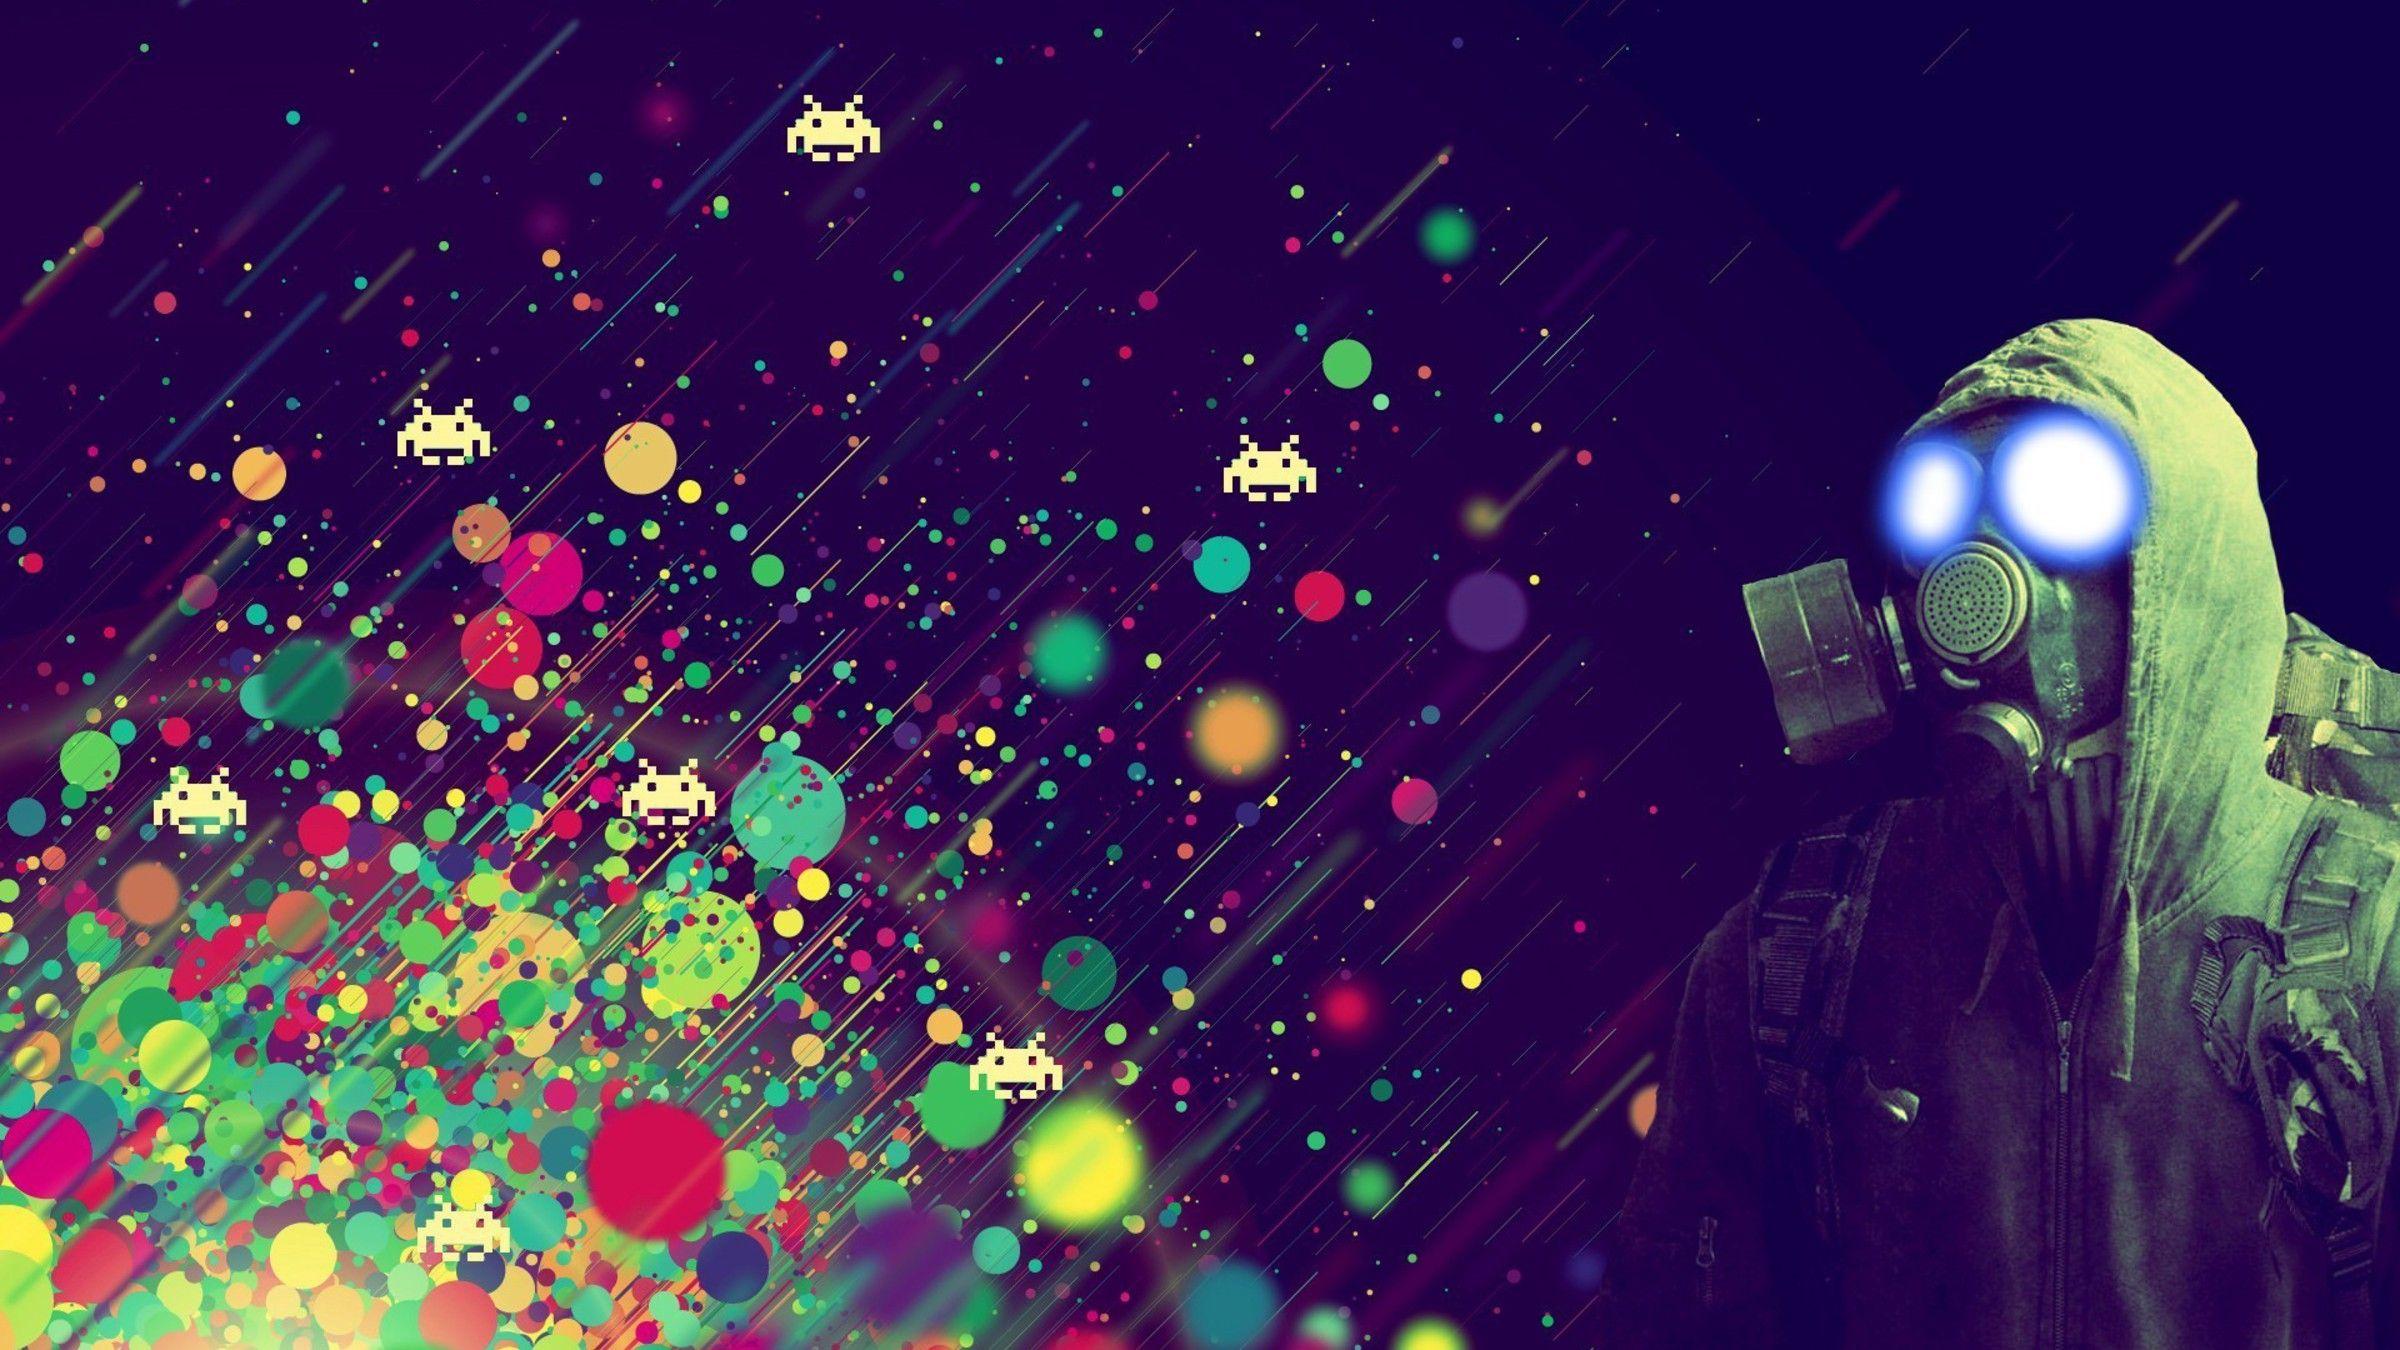 Games gaming gas masks light outer space wallpaper